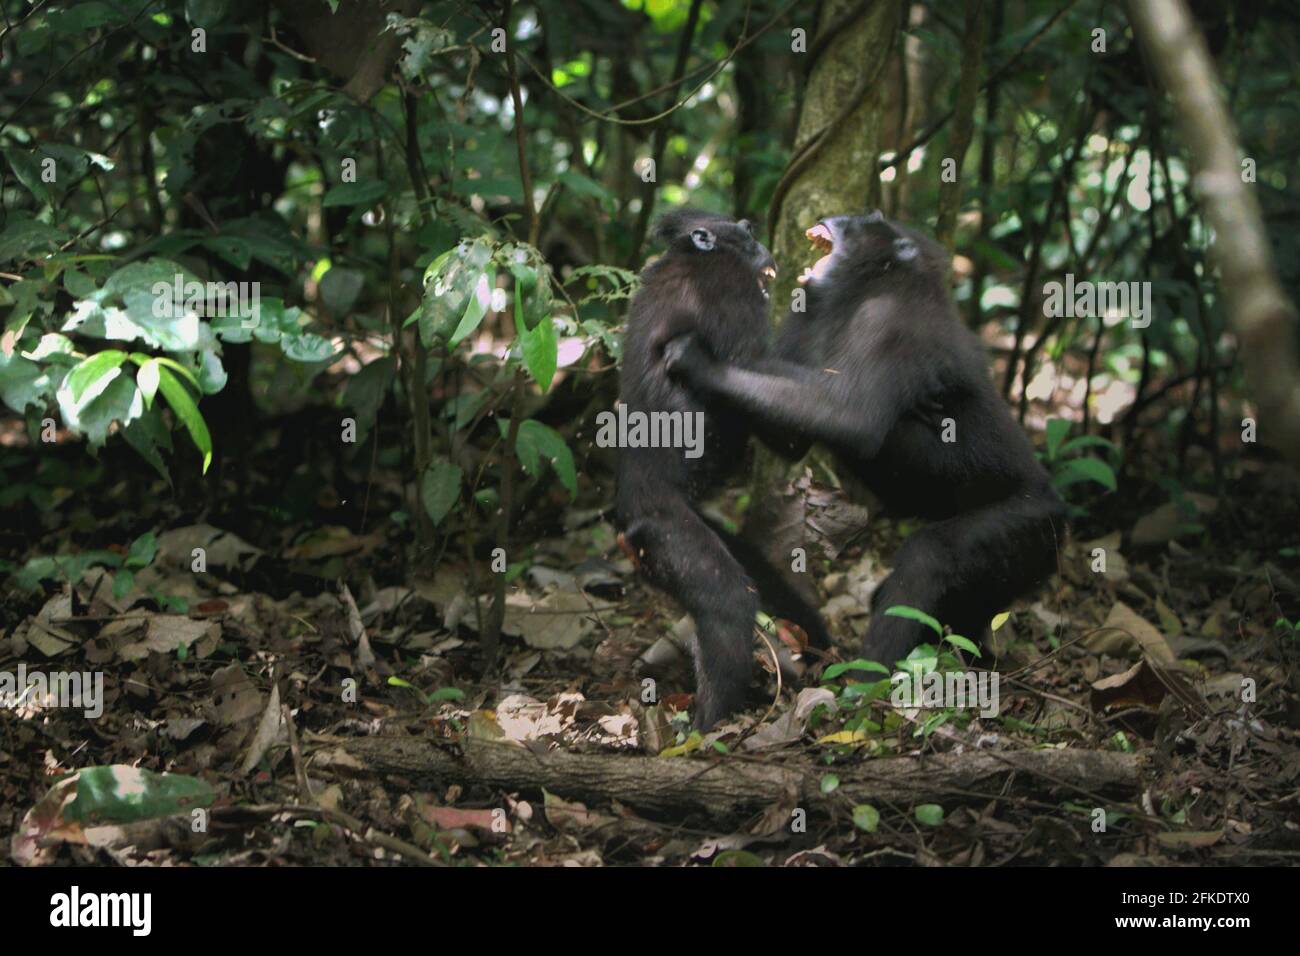 Aggressive behaviour of Celebes crested macaques during social activity. Frequency and intensity of aggression between male individuals in one crested macaque social group is strongly correlated with rank distance, according to Caitlin Reed, Timothy O'Brien and Margaret Kinnaird in a research paper published on International Journal of Primatology in 1997. Stock Photo